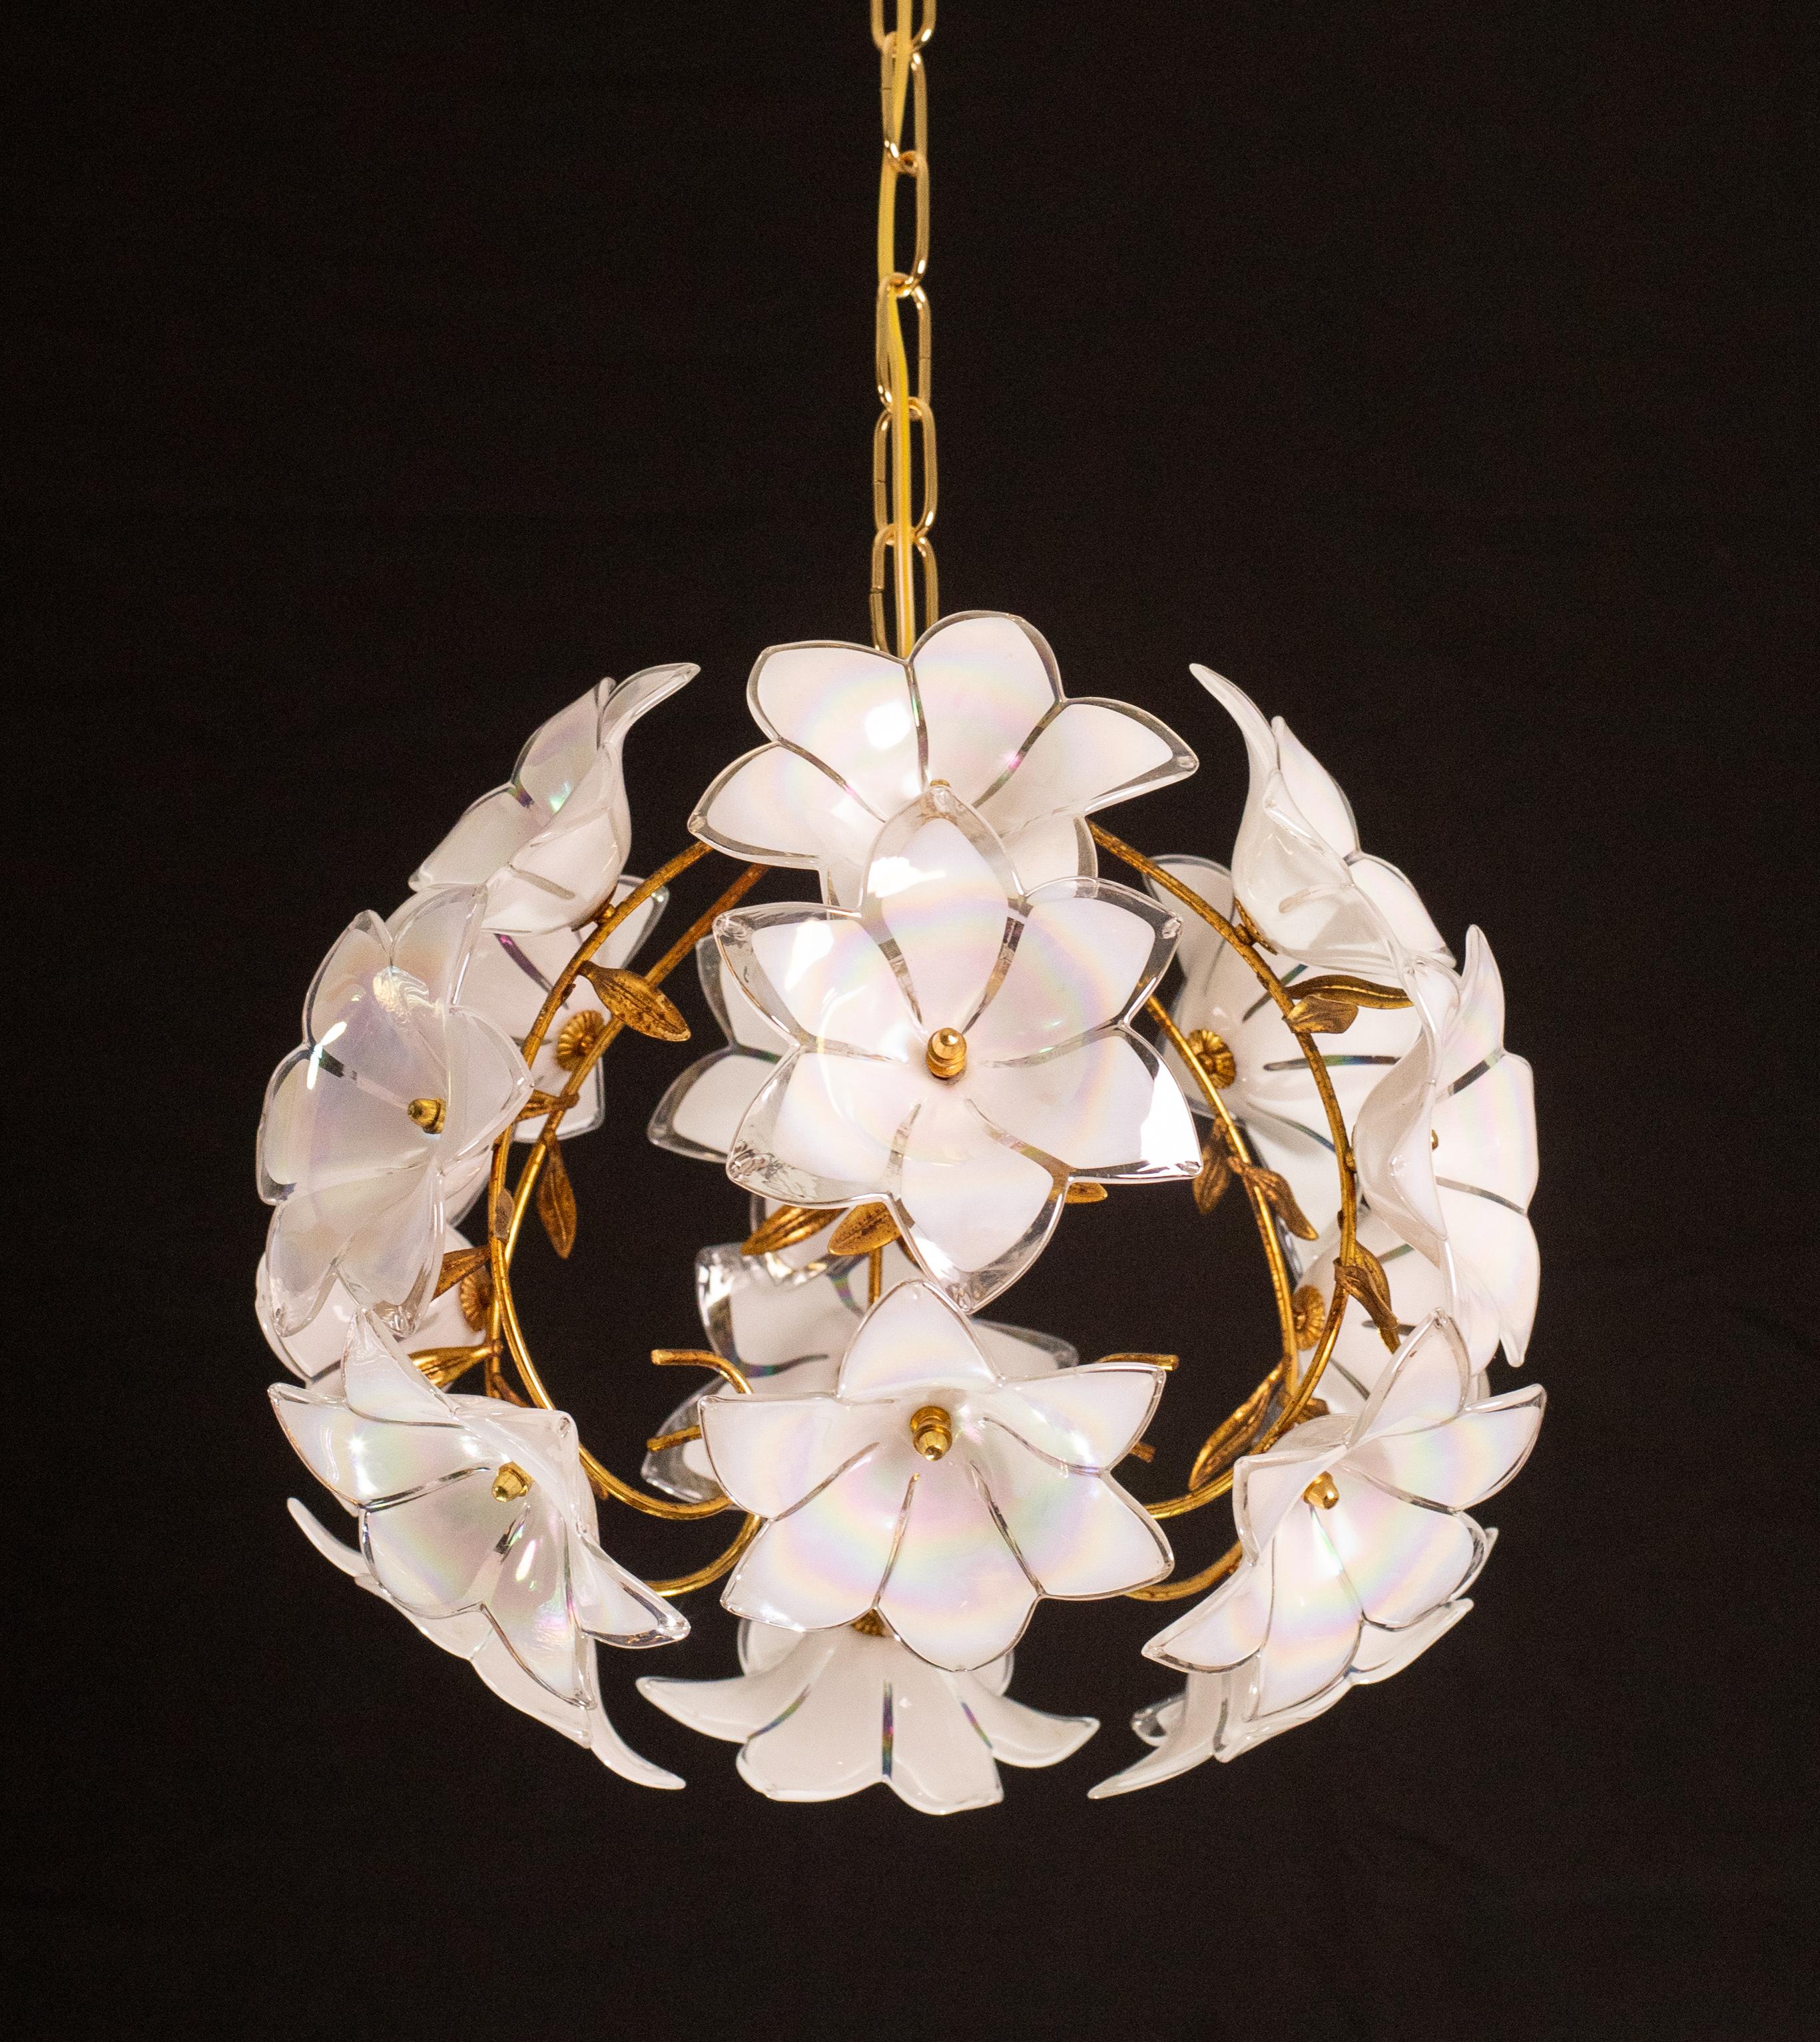 Pair of vintage Murano glass chandeliers filled with white flowers.
The structures take some wear and tear, but with the flowers mounted it is not too visible.
The chandelier has 1 light points with E14 socket, possibility of wiring for Usa